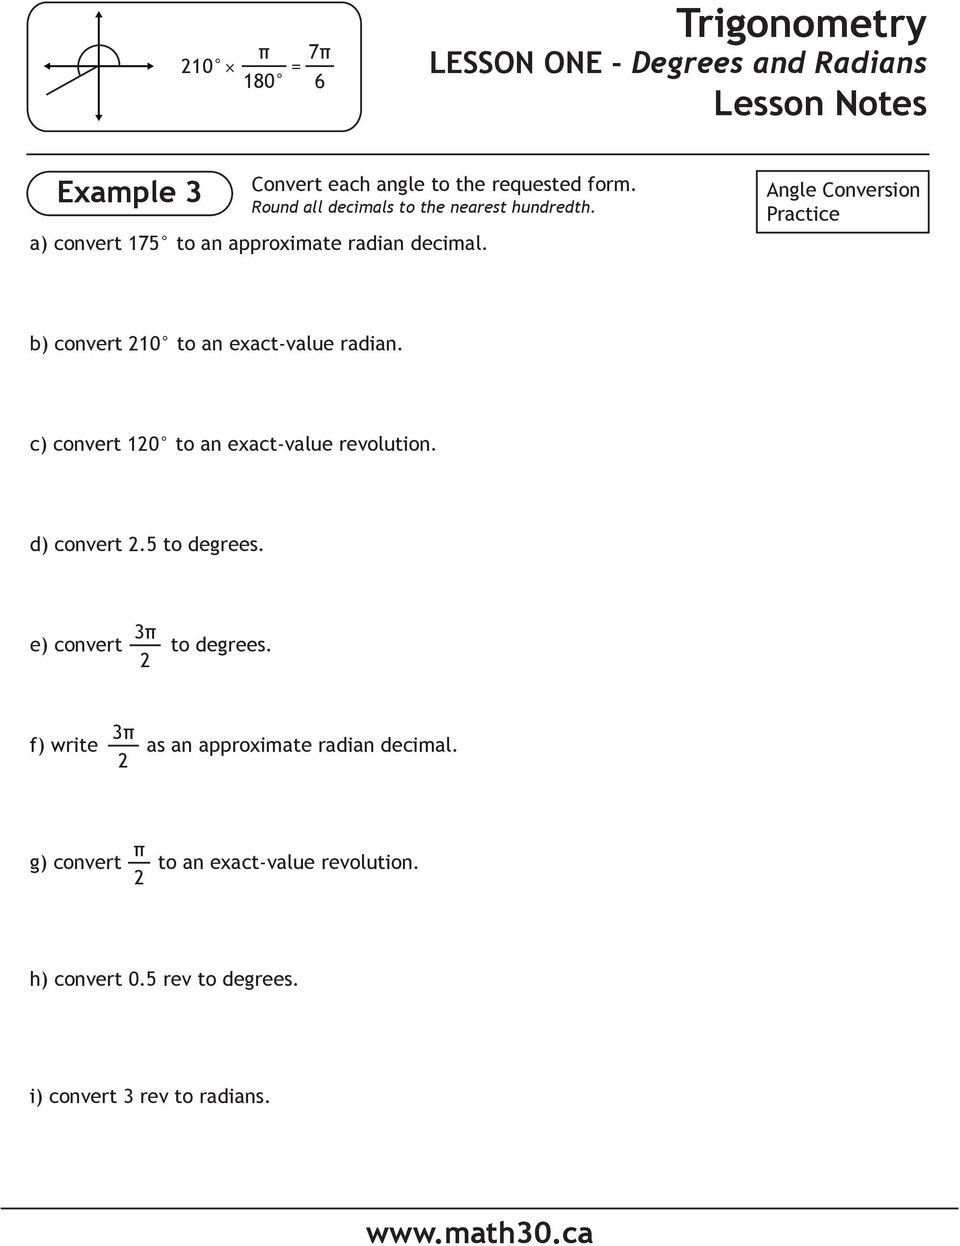 Radians to Degrees Worksheet Trigonometry Lesson One Degrees and Radians Lesson Notes